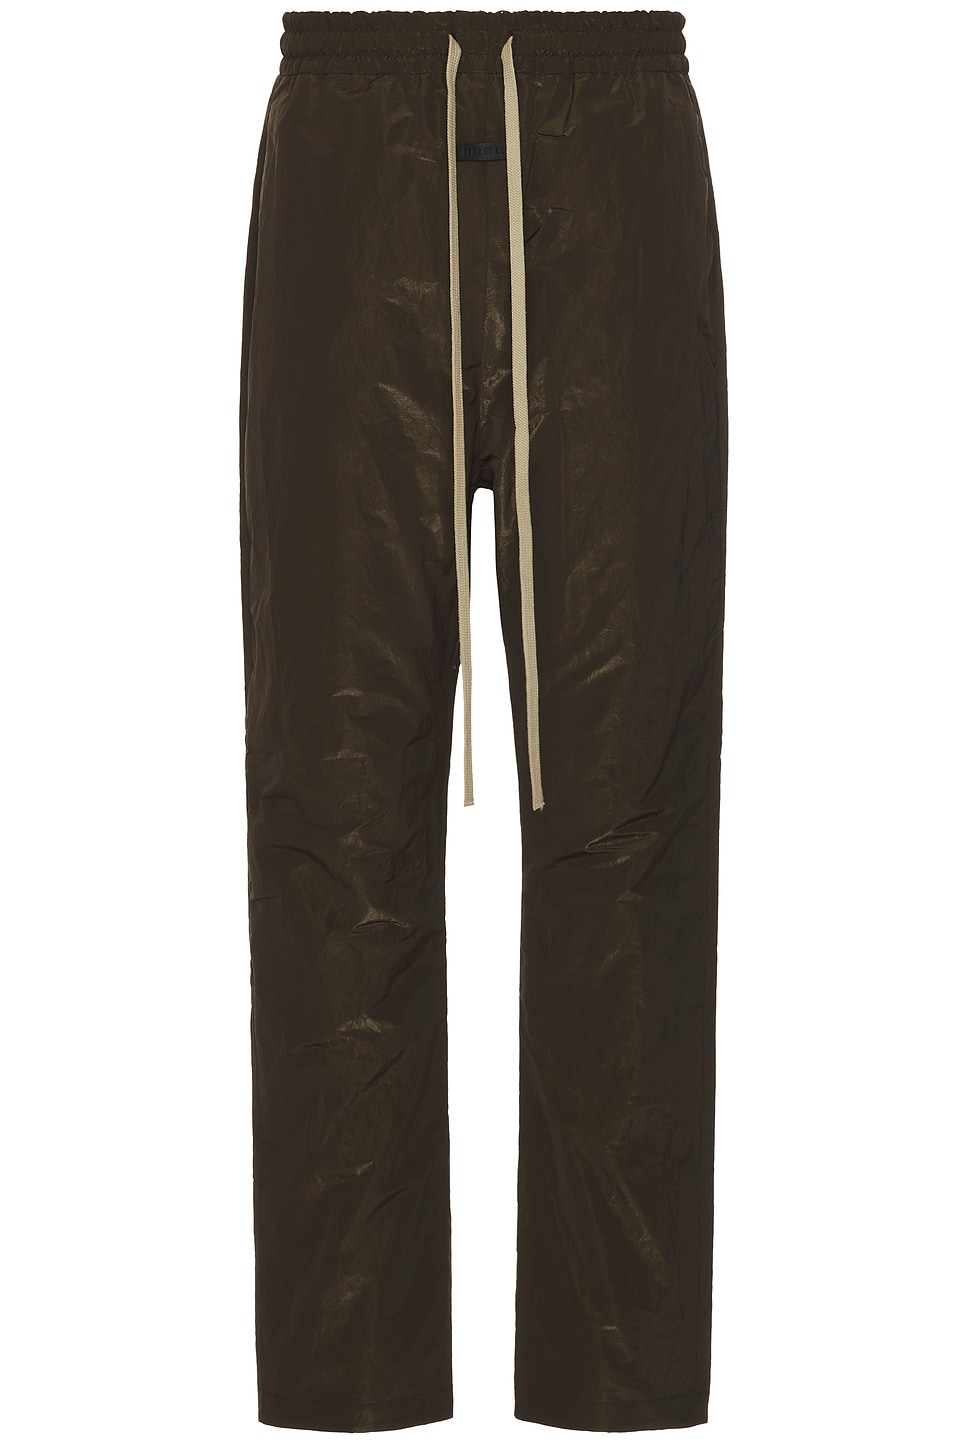 Image 1 of Fear of God Wrinkled Polyester Forum Pant in Mocha